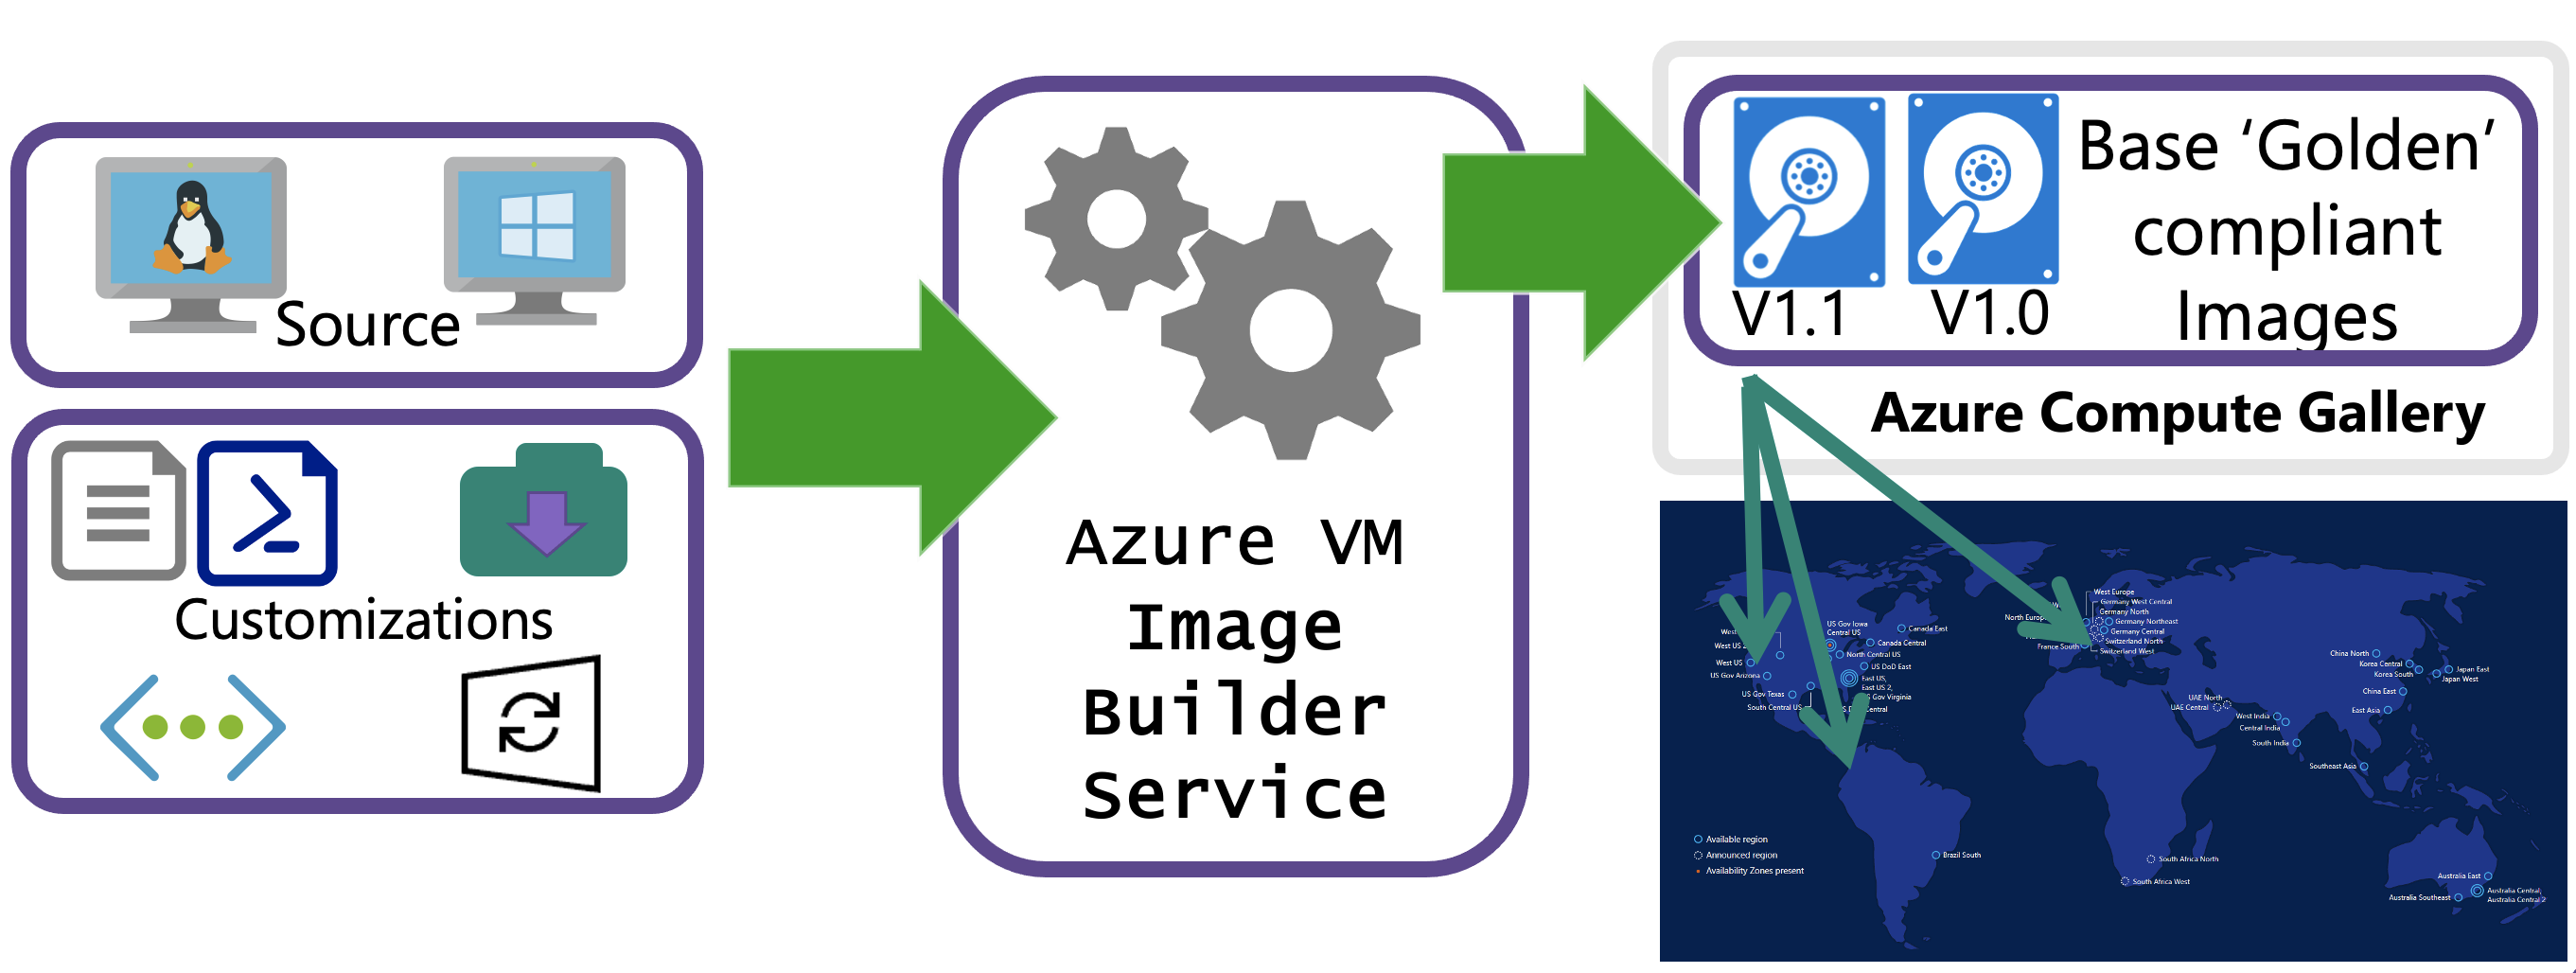 Diagram of the VM Image Builder process, showing the sources (Windows/Linux), customizations (Shell, PowerShell, Windows Update and Restart, adding files), and global distribution with Compute Gallery